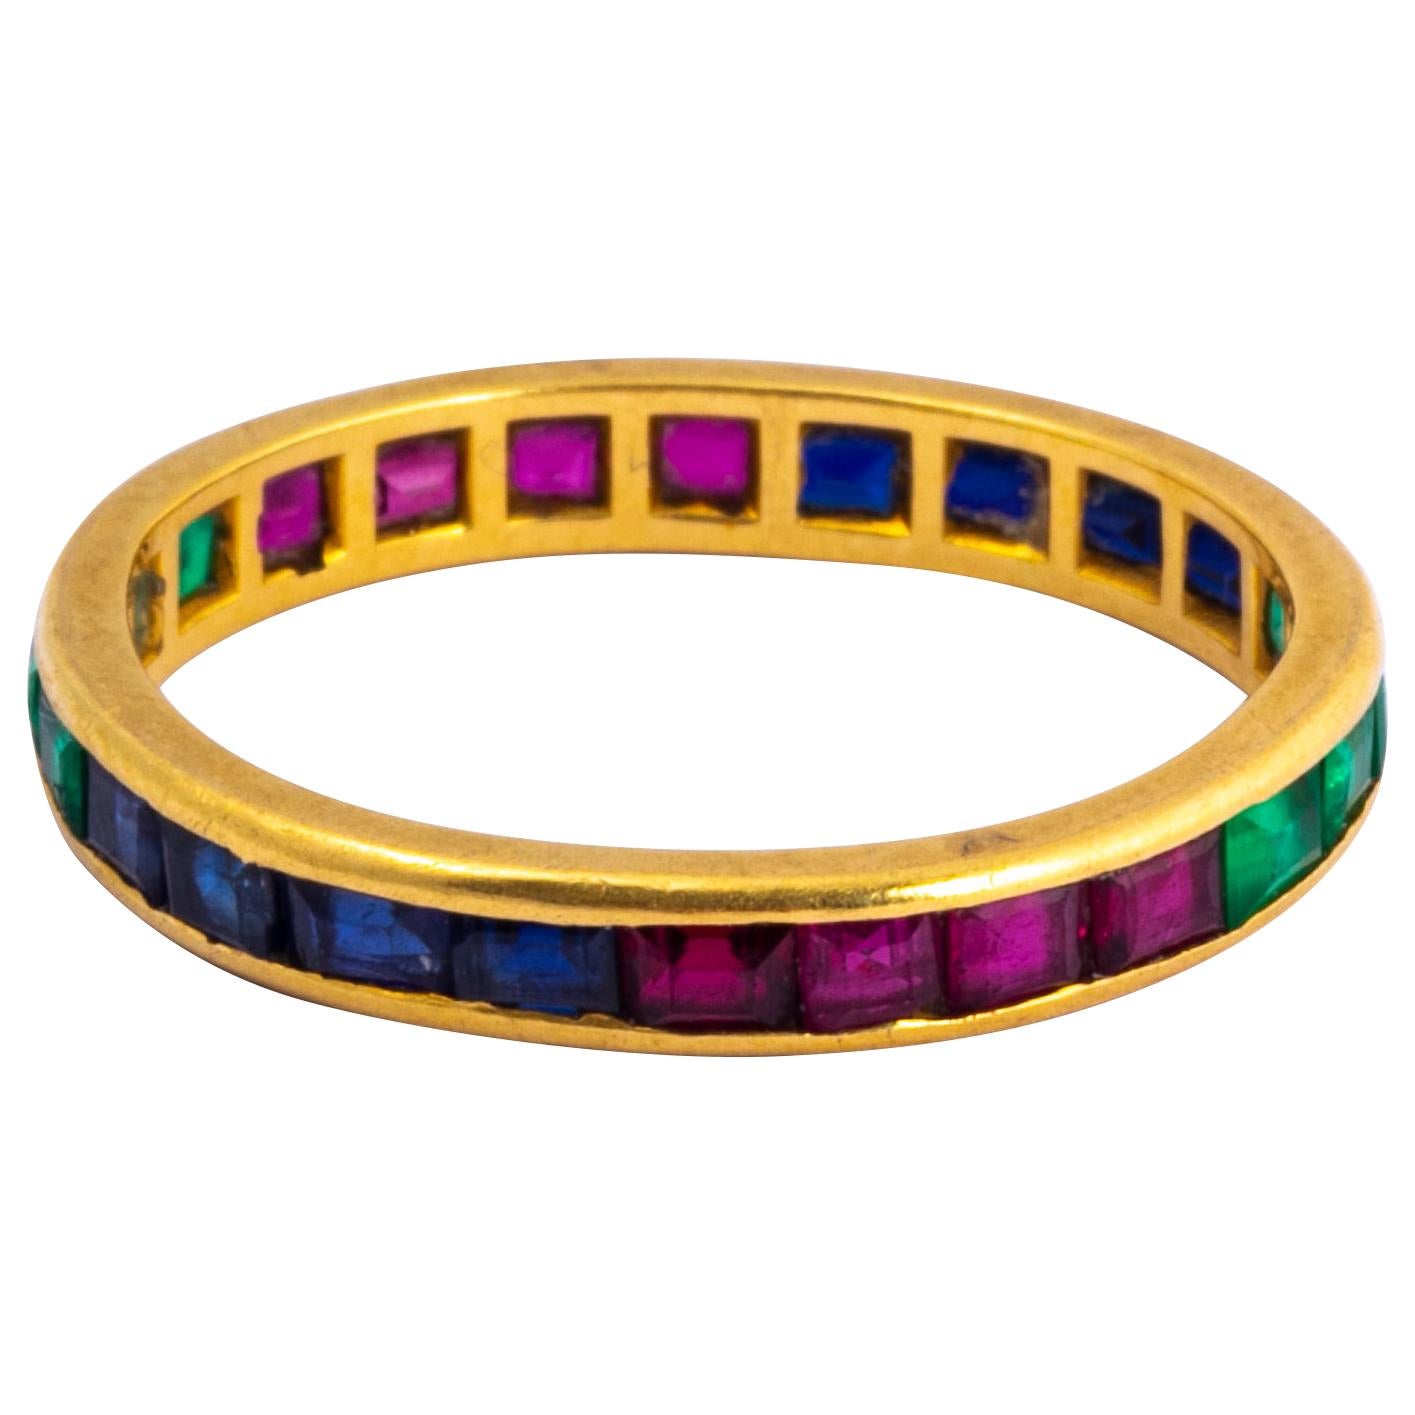 Antique Ruby, Sapphire and Emerald 18 Carat Gold Eternity Ring